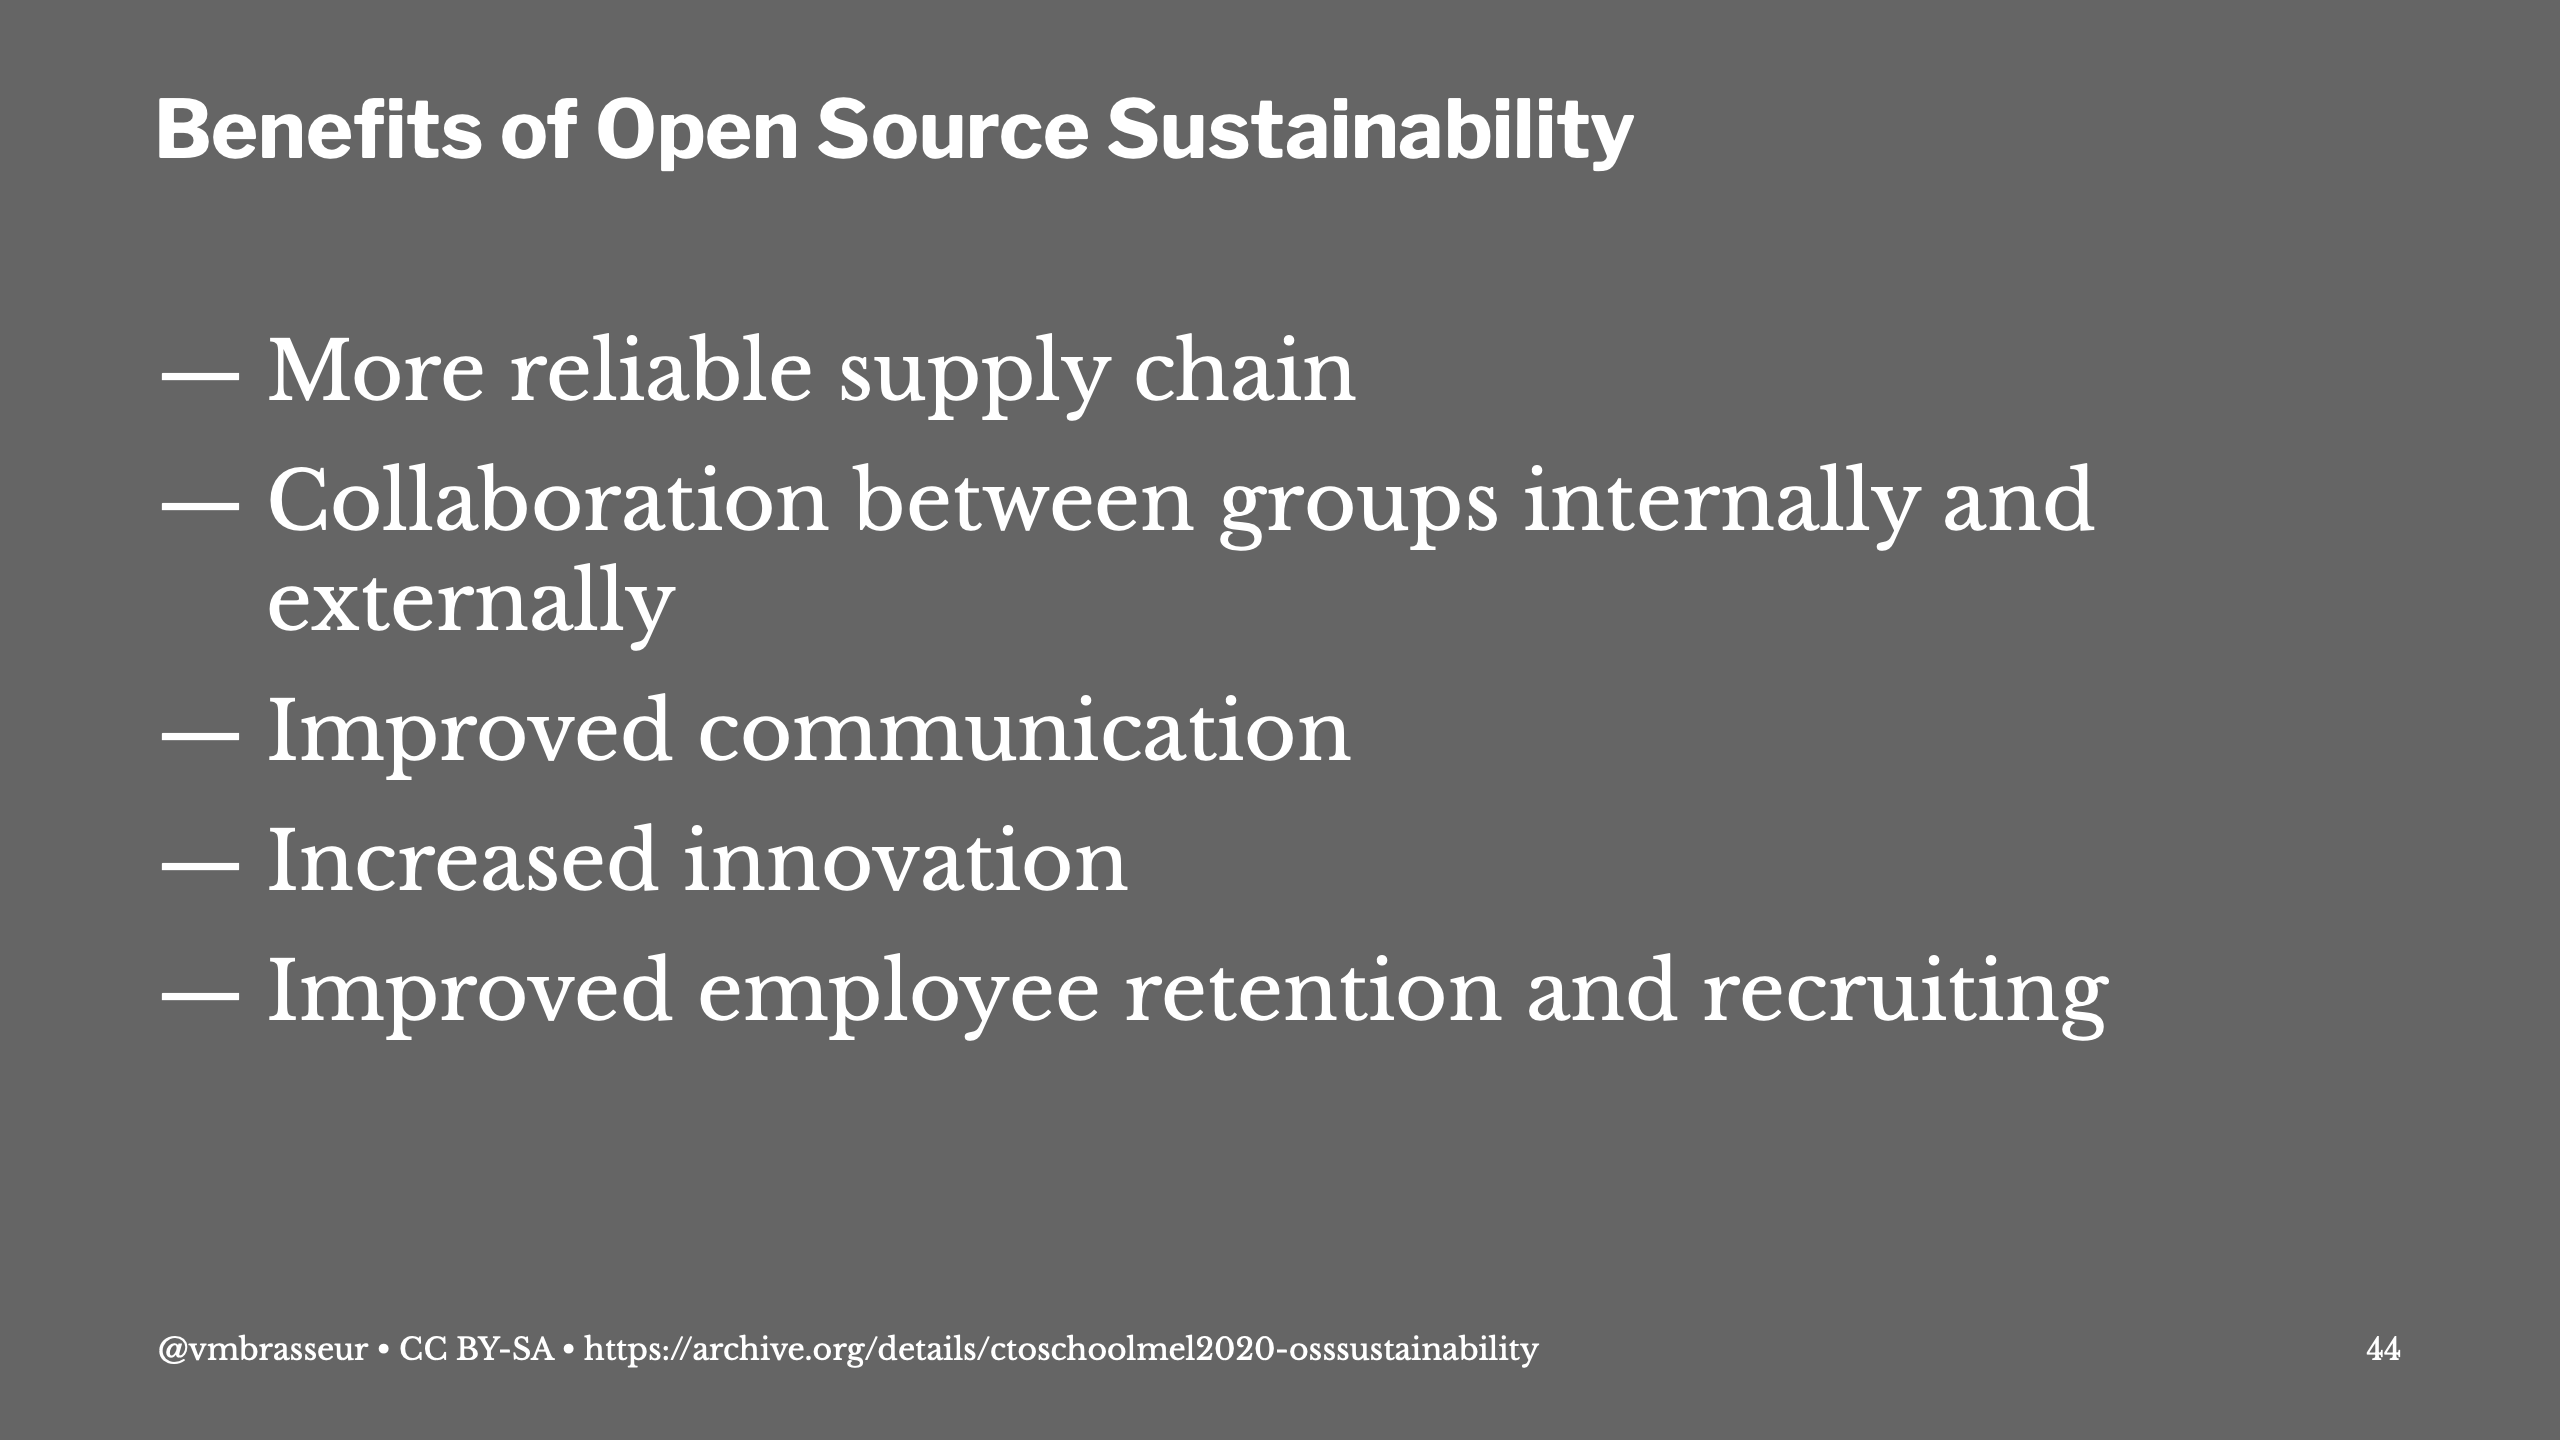 Benefits of Open Source Sustainability: More reliable supply chain, Collaboration between groups internally and externally, Improved communication, Increased innovation, Improved employee retention and recruiting